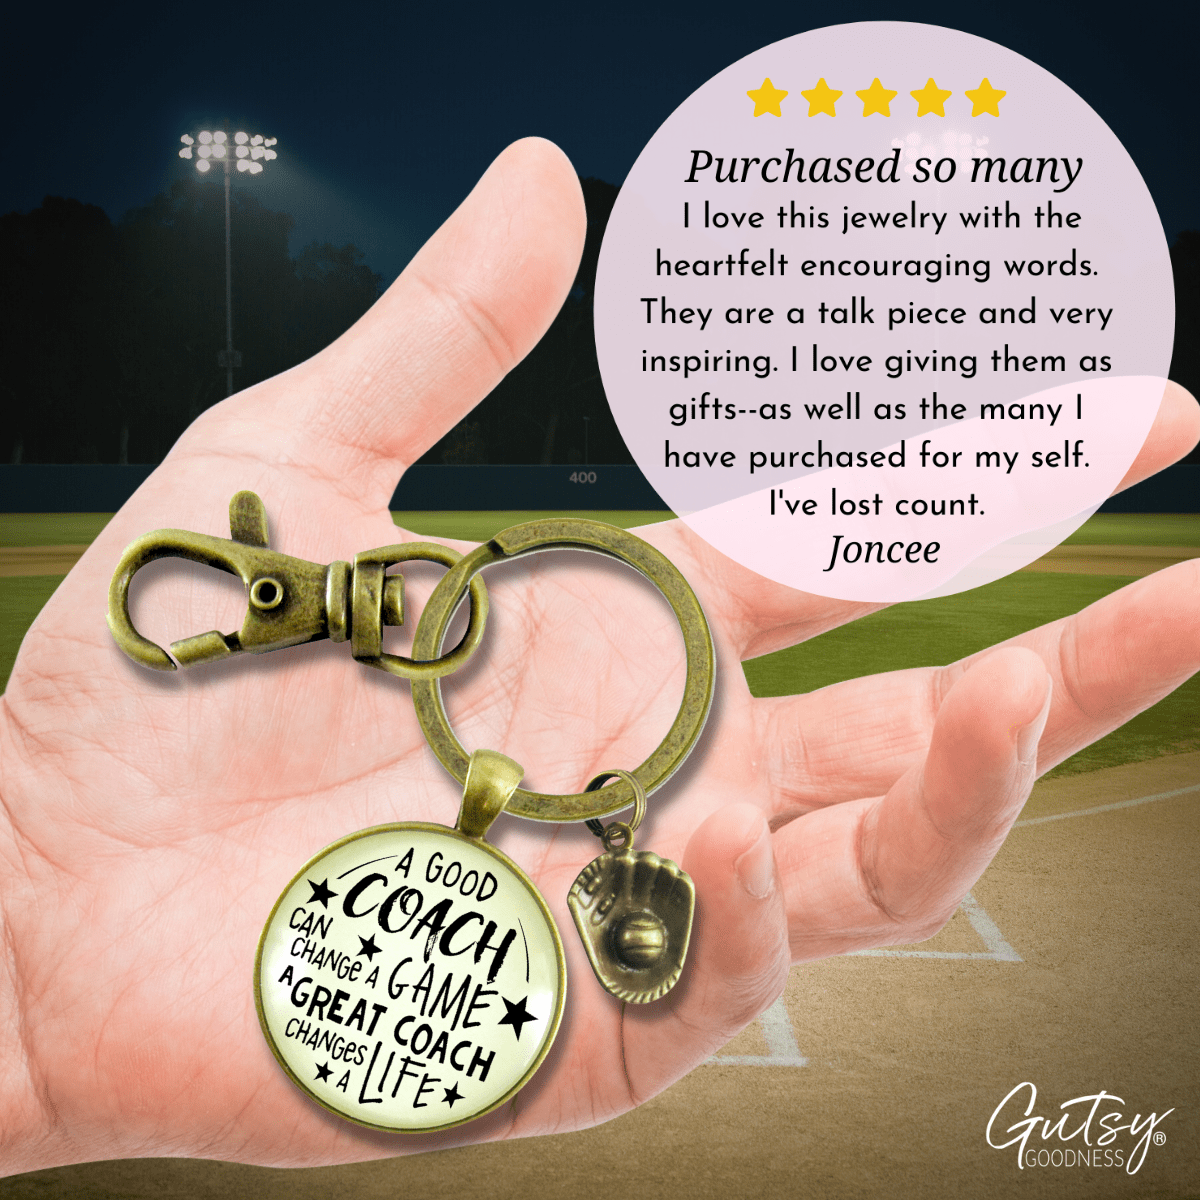 Baseball Coaching Sport Keychain Great Coach Changes Life Thank You Gift - Gutsy Goodness Handmade Jewelry Gifts